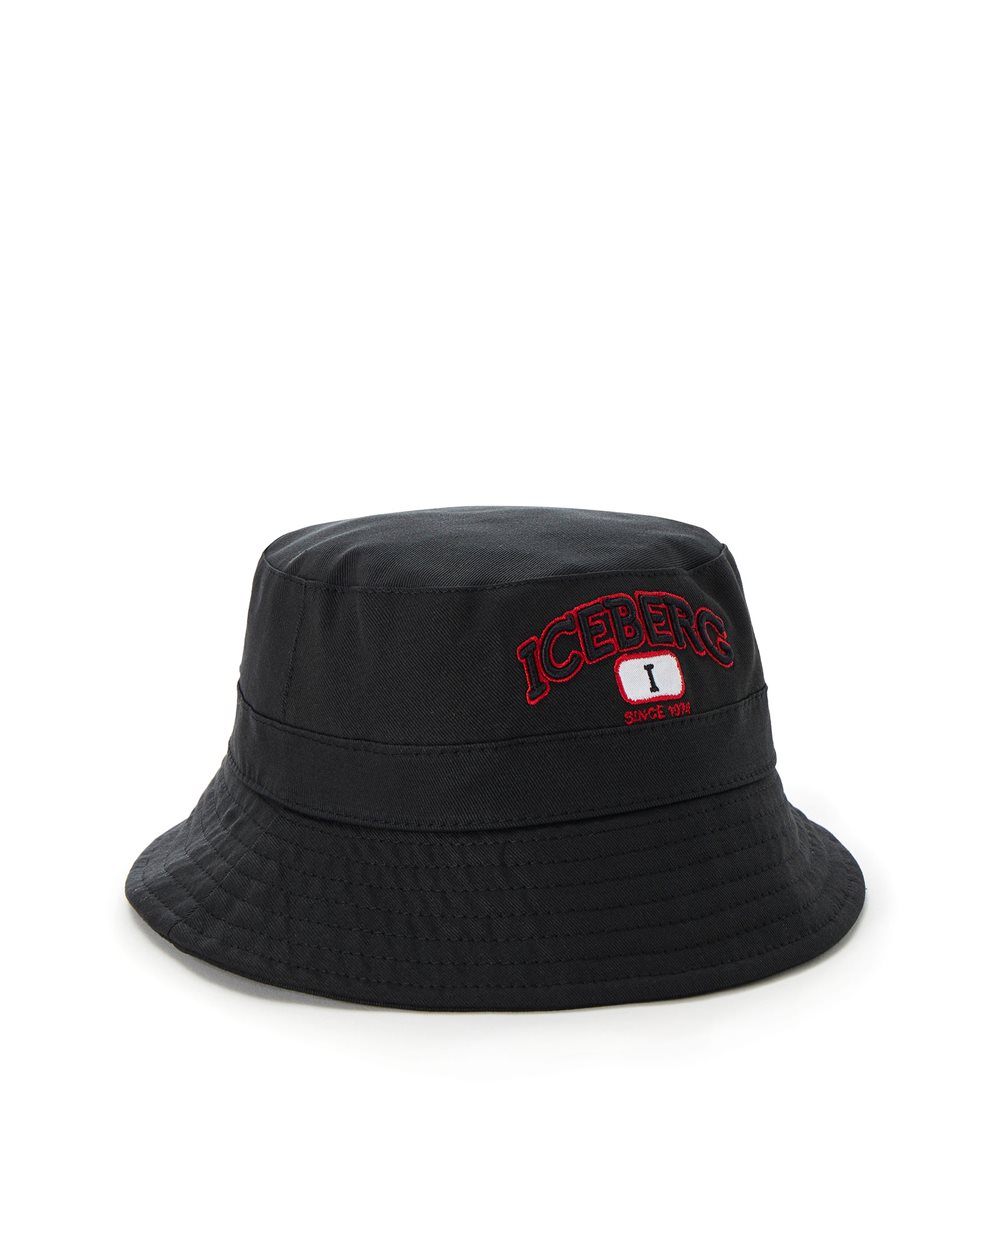 Bucket hat with logo - ( SECONDO STEP IT ) PROMO SALDI UP TO 50% | Iceberg - Official Website